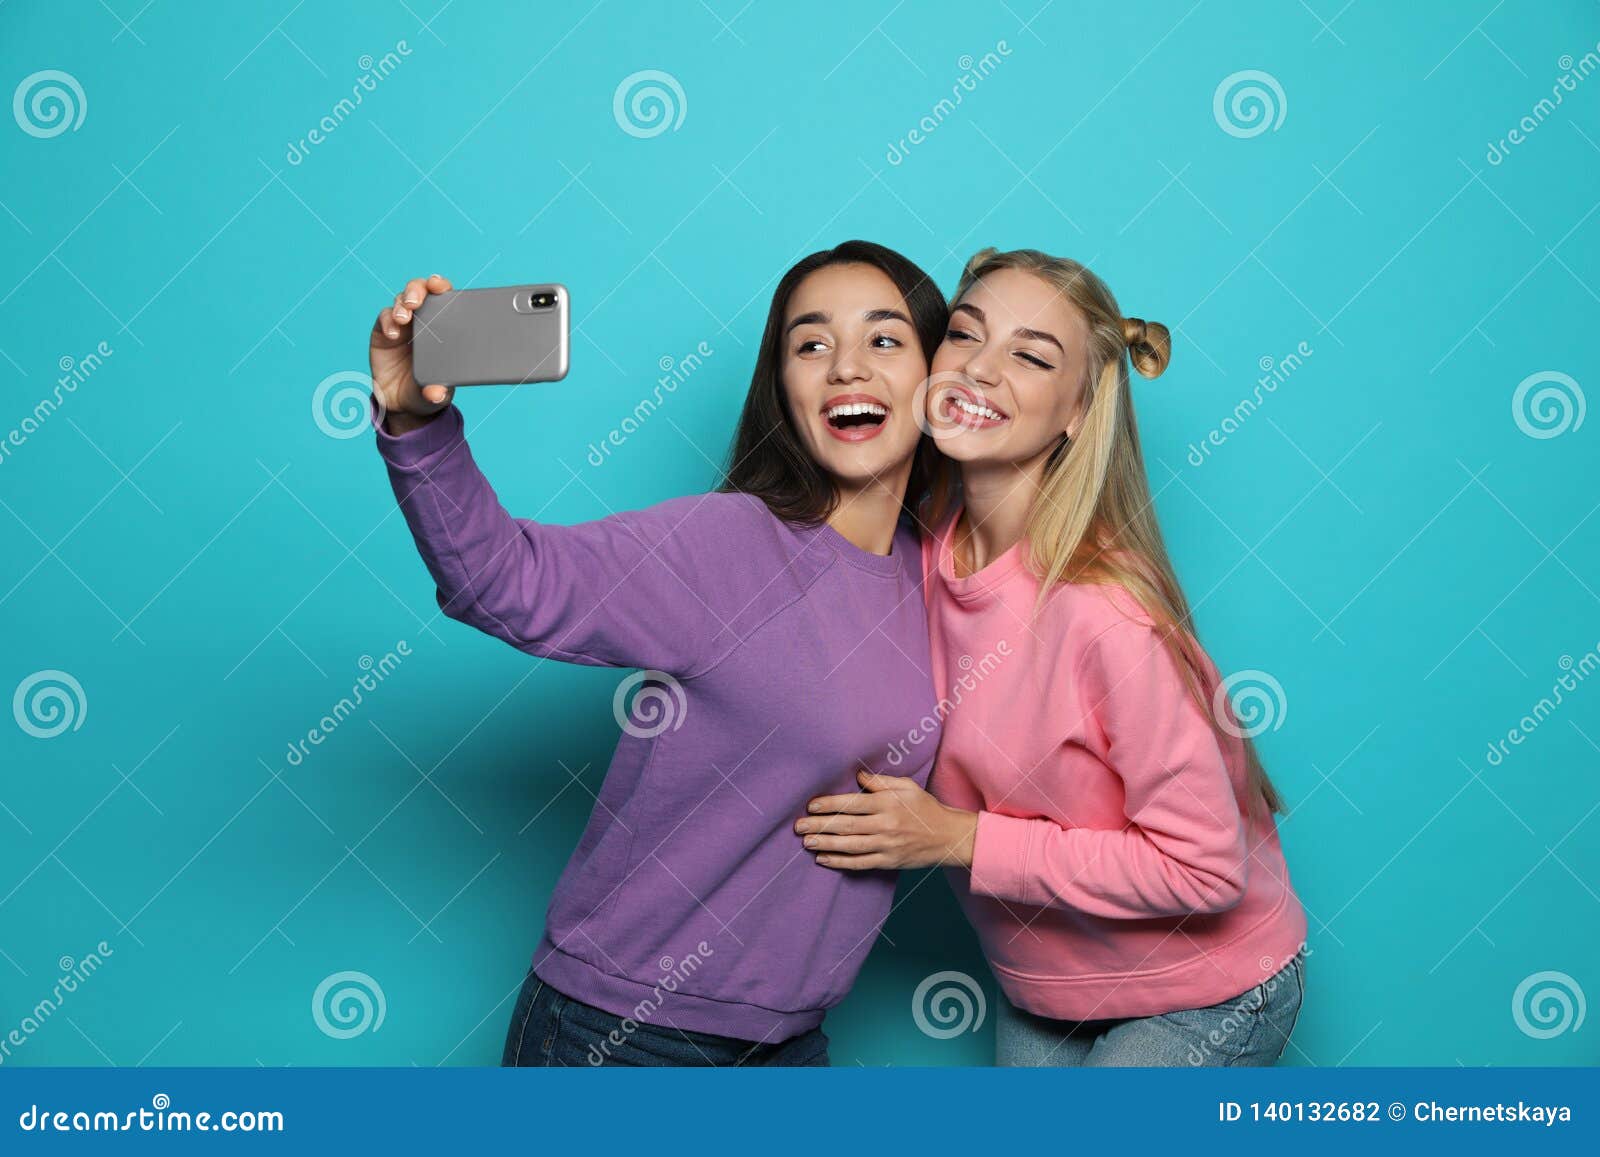 Young Women Laughing while Taking Selfie Stock Photo - Image of ...